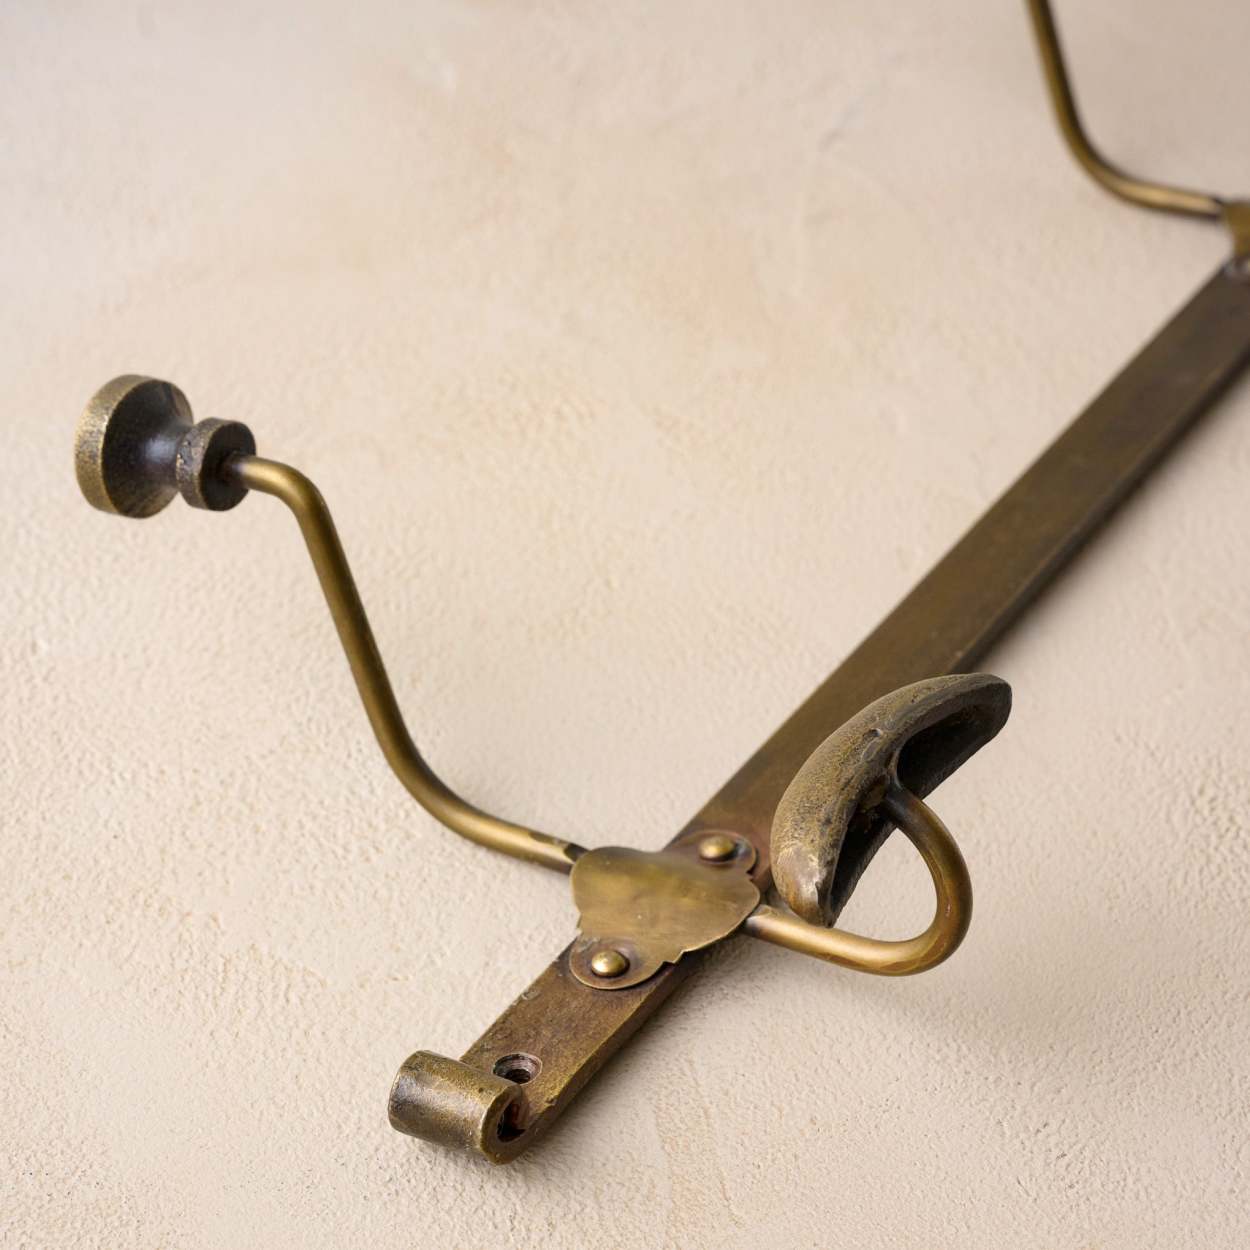 2 Solid Antique Brass Double Coat Hooks w. Oval Backplate 3 x 2 #C9